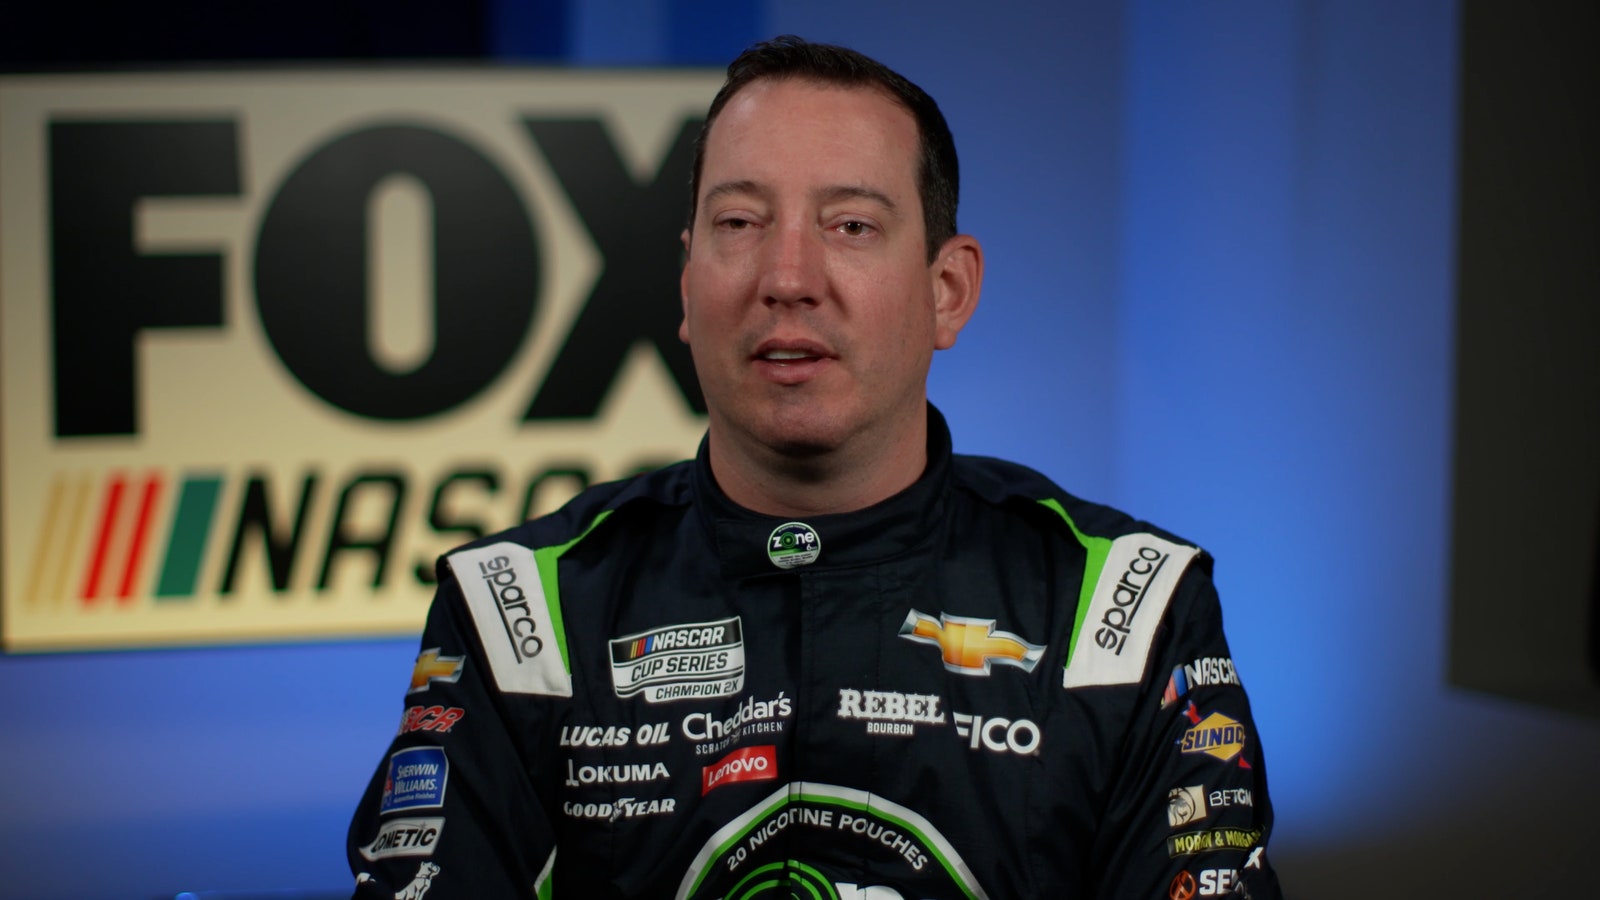 Kyle Busch discusses the shutting down of Rowdy Energy